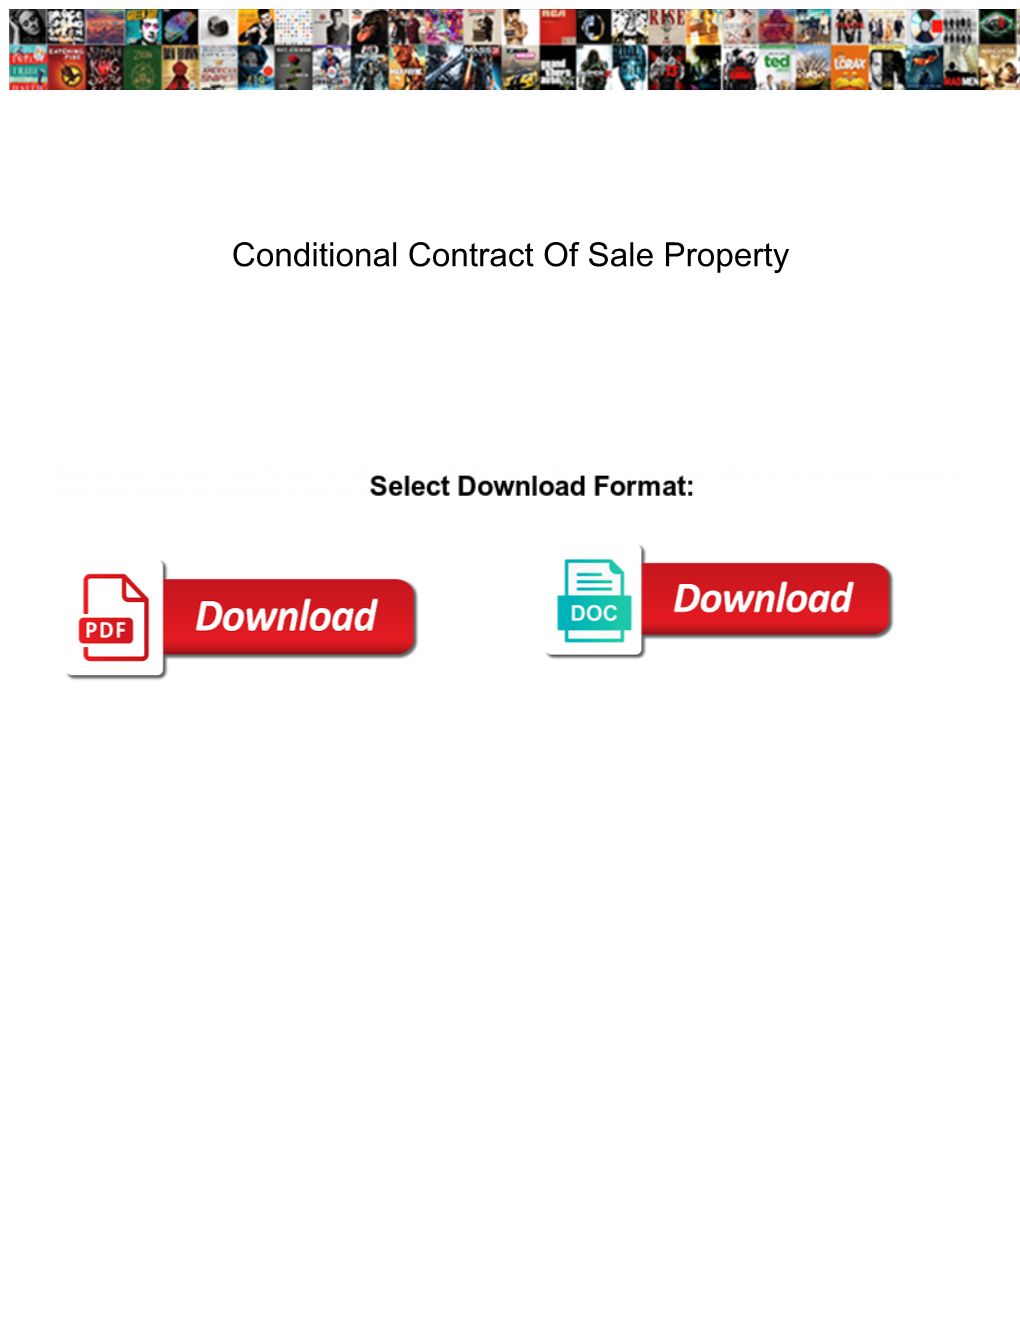 Conditional Contract of Sale Property